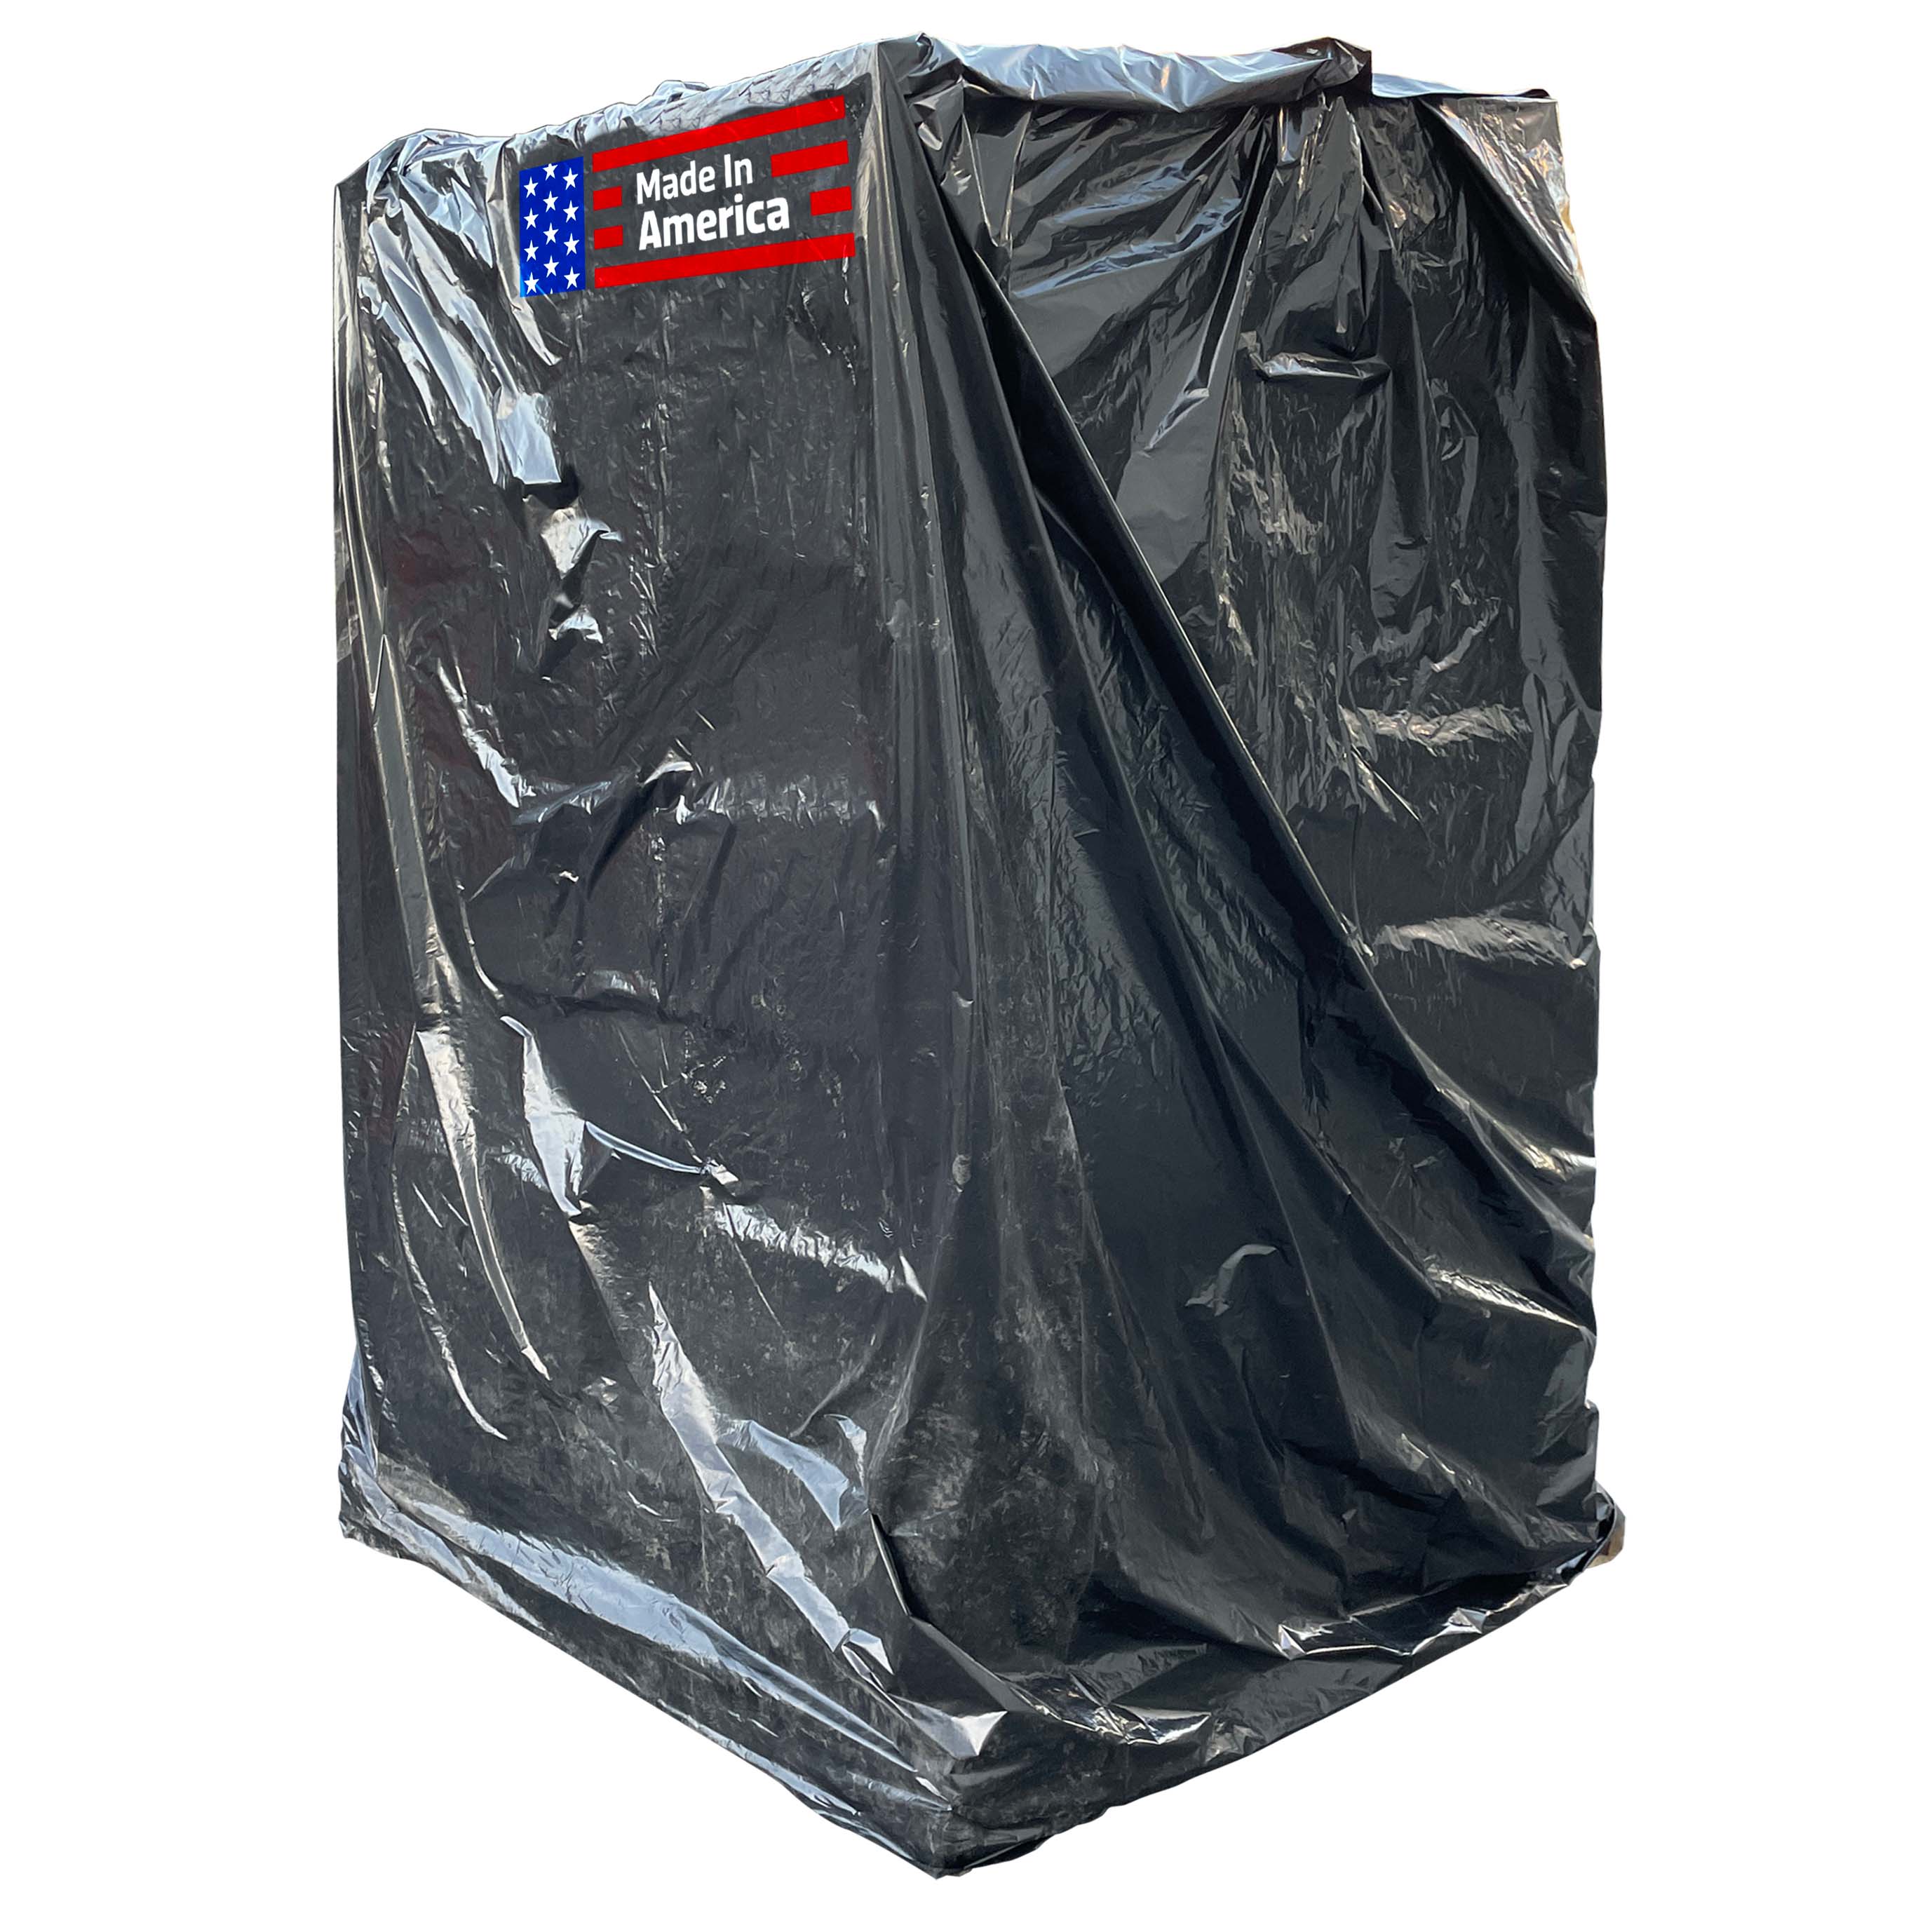 Sandbaggy Gaylord & Tote Bin Liners, Made in USA